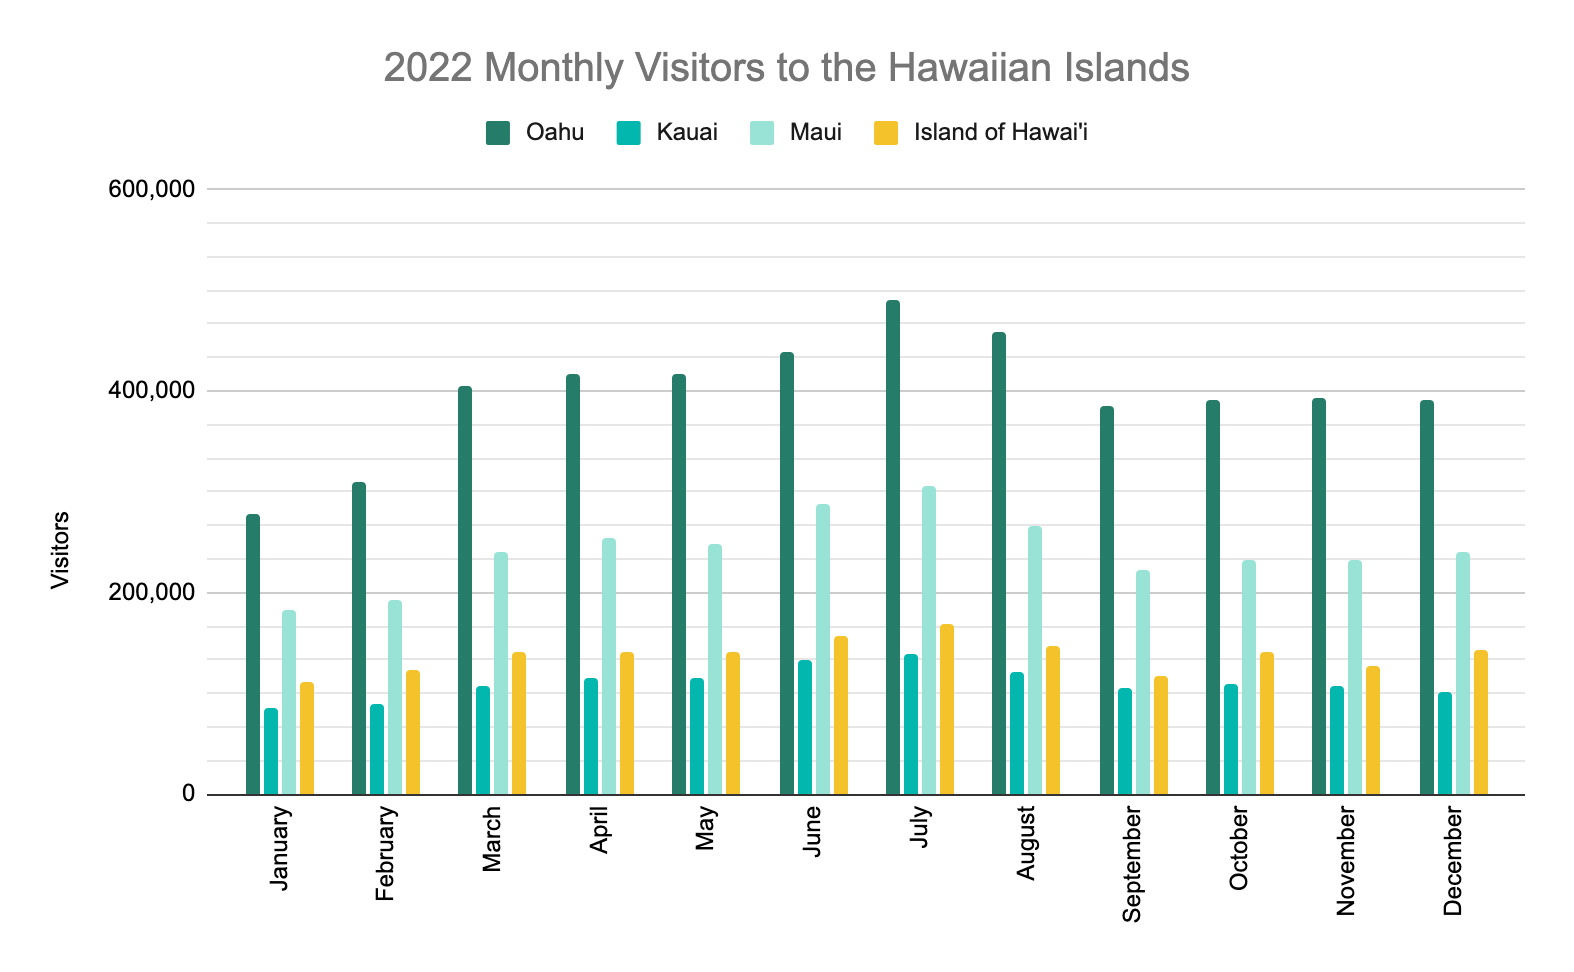 Hawaii in July - 2022 monthly visitors to the islands